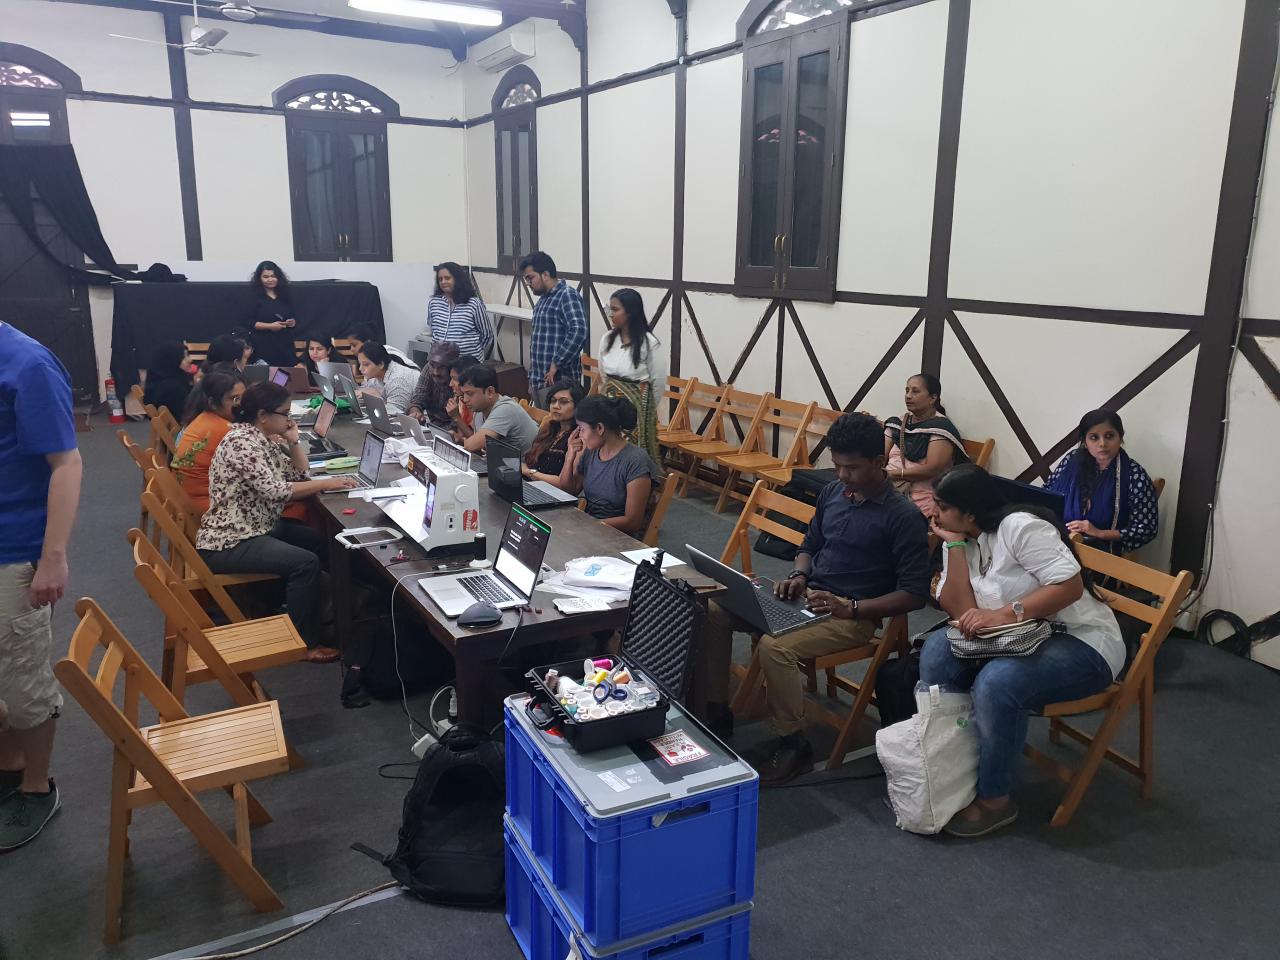 Participants of the »Digital Embroidery« Workshop at the Dr. Bhau Daji Lad Museum in Mumbai